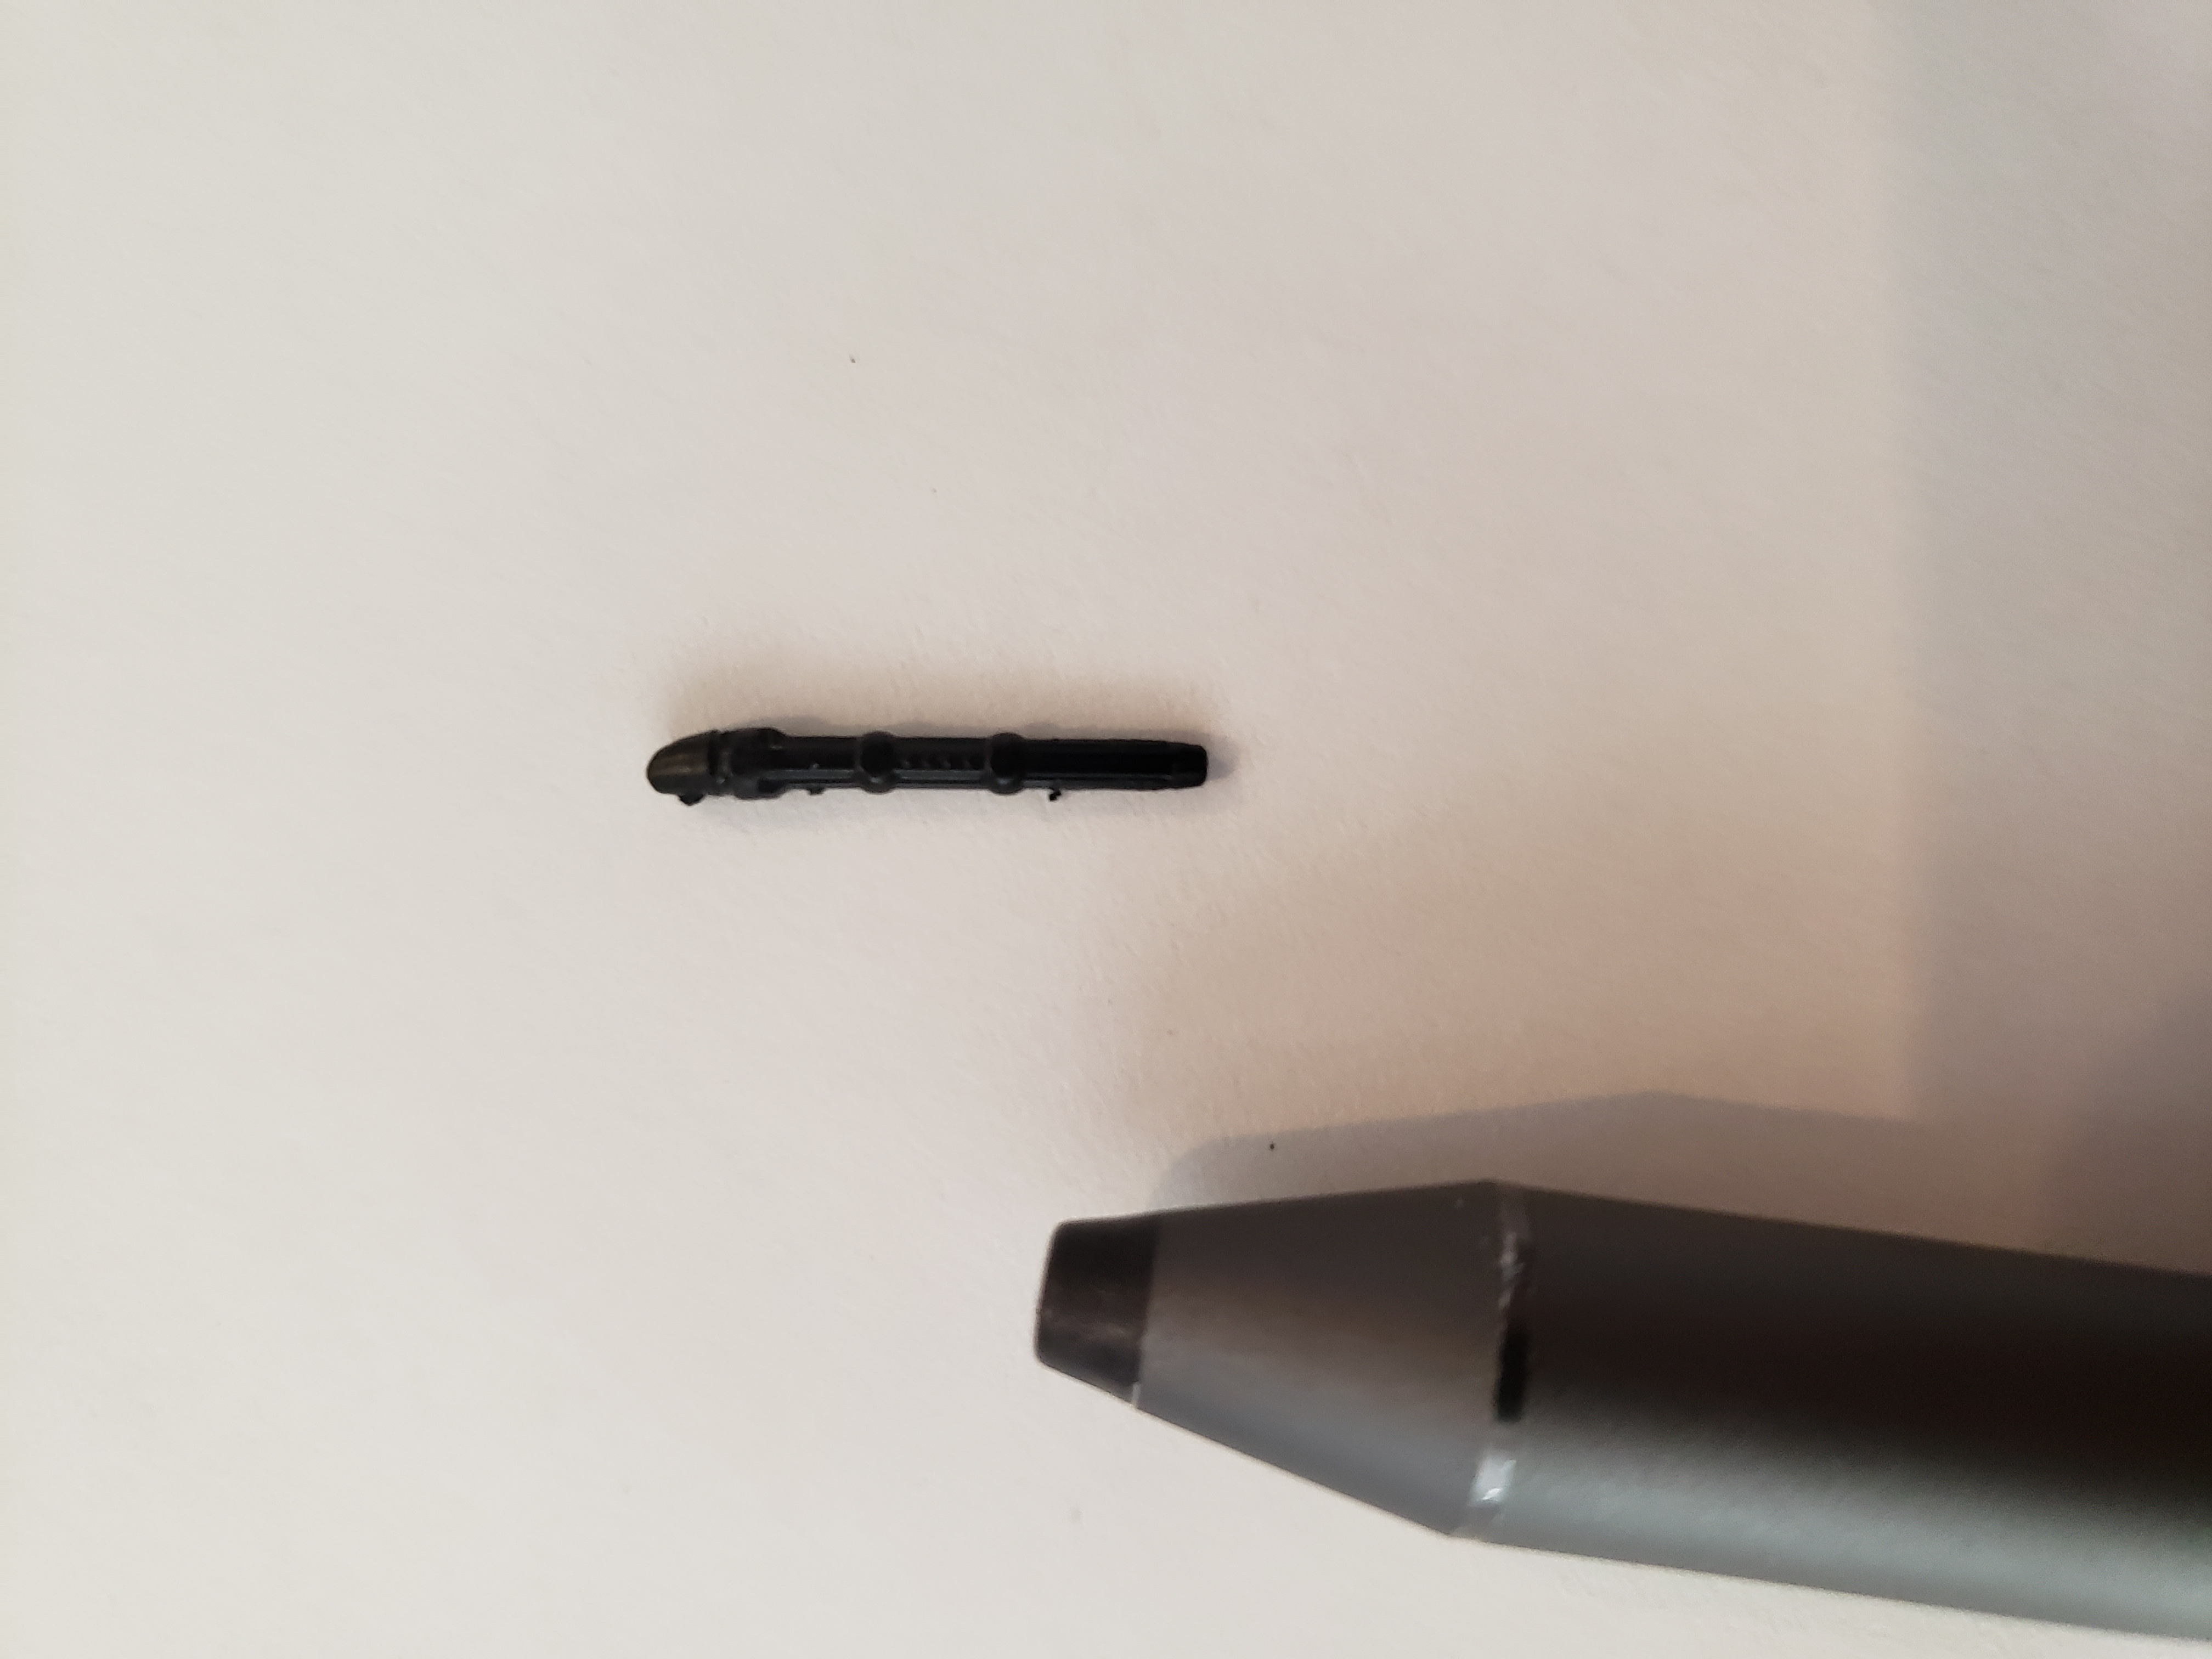 HP Pen Nib(Tip) Replacements - HP Support Community - 6930005